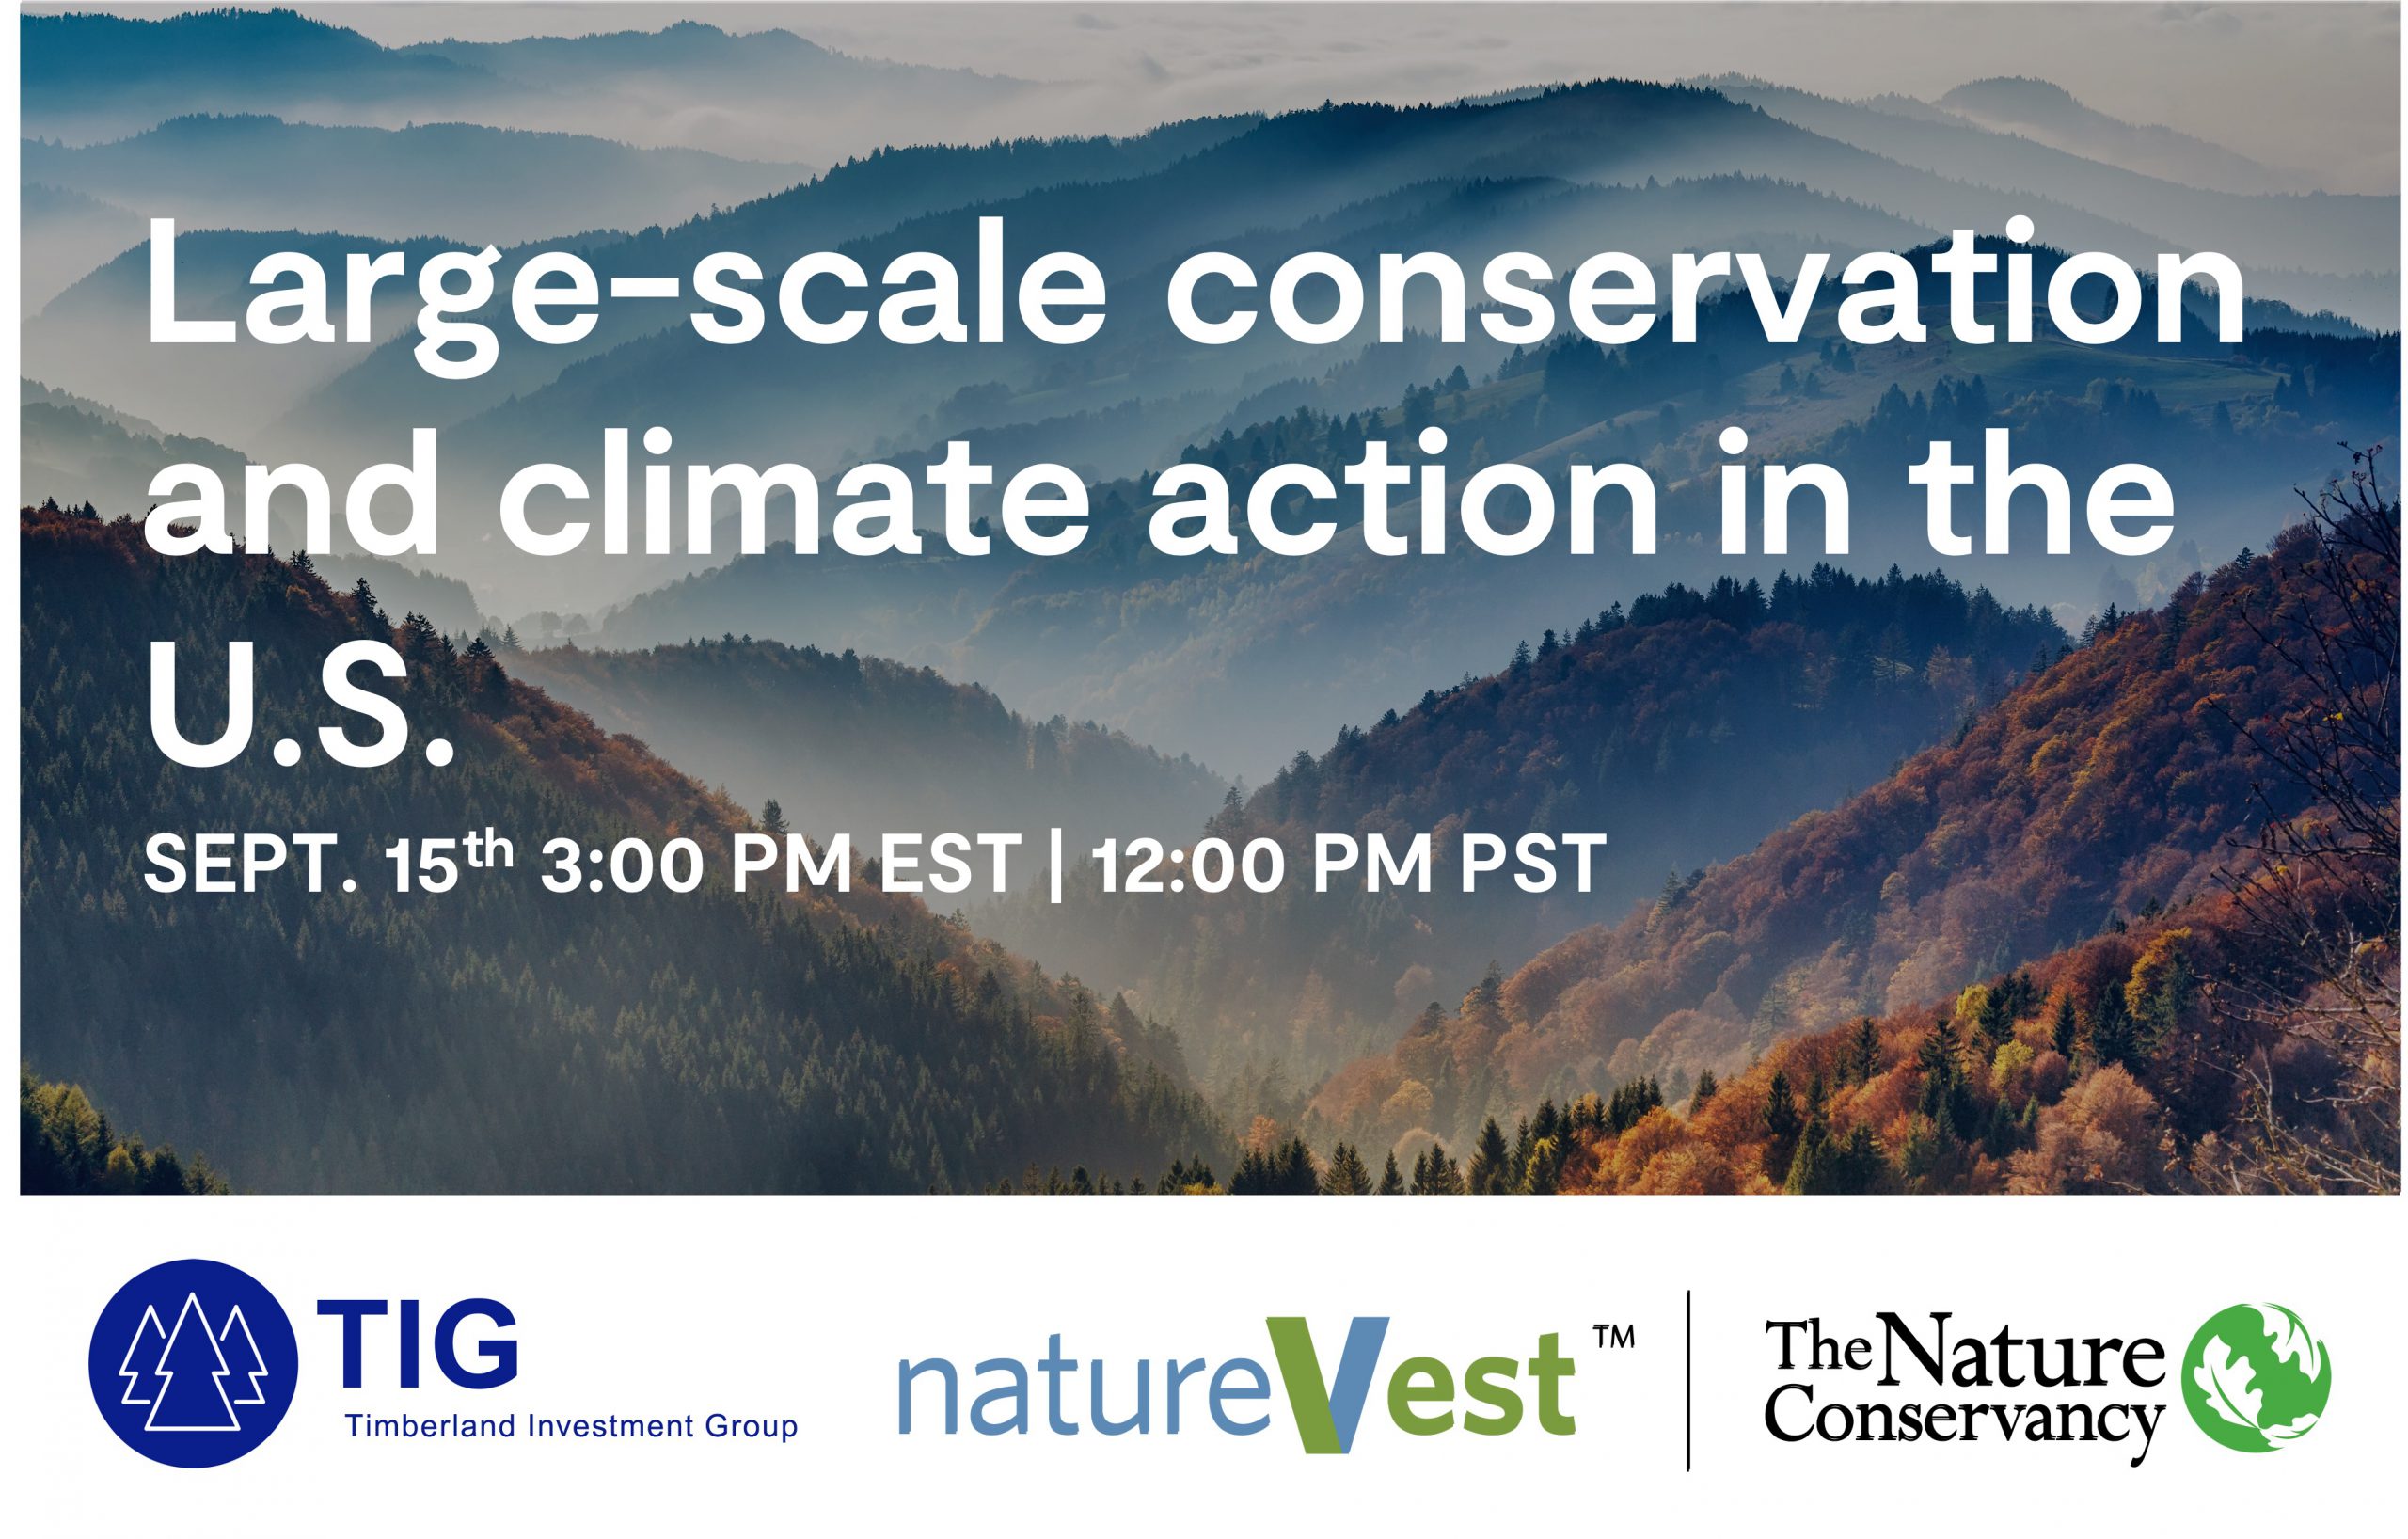 Large-scale conservation and climate action in the U.S.